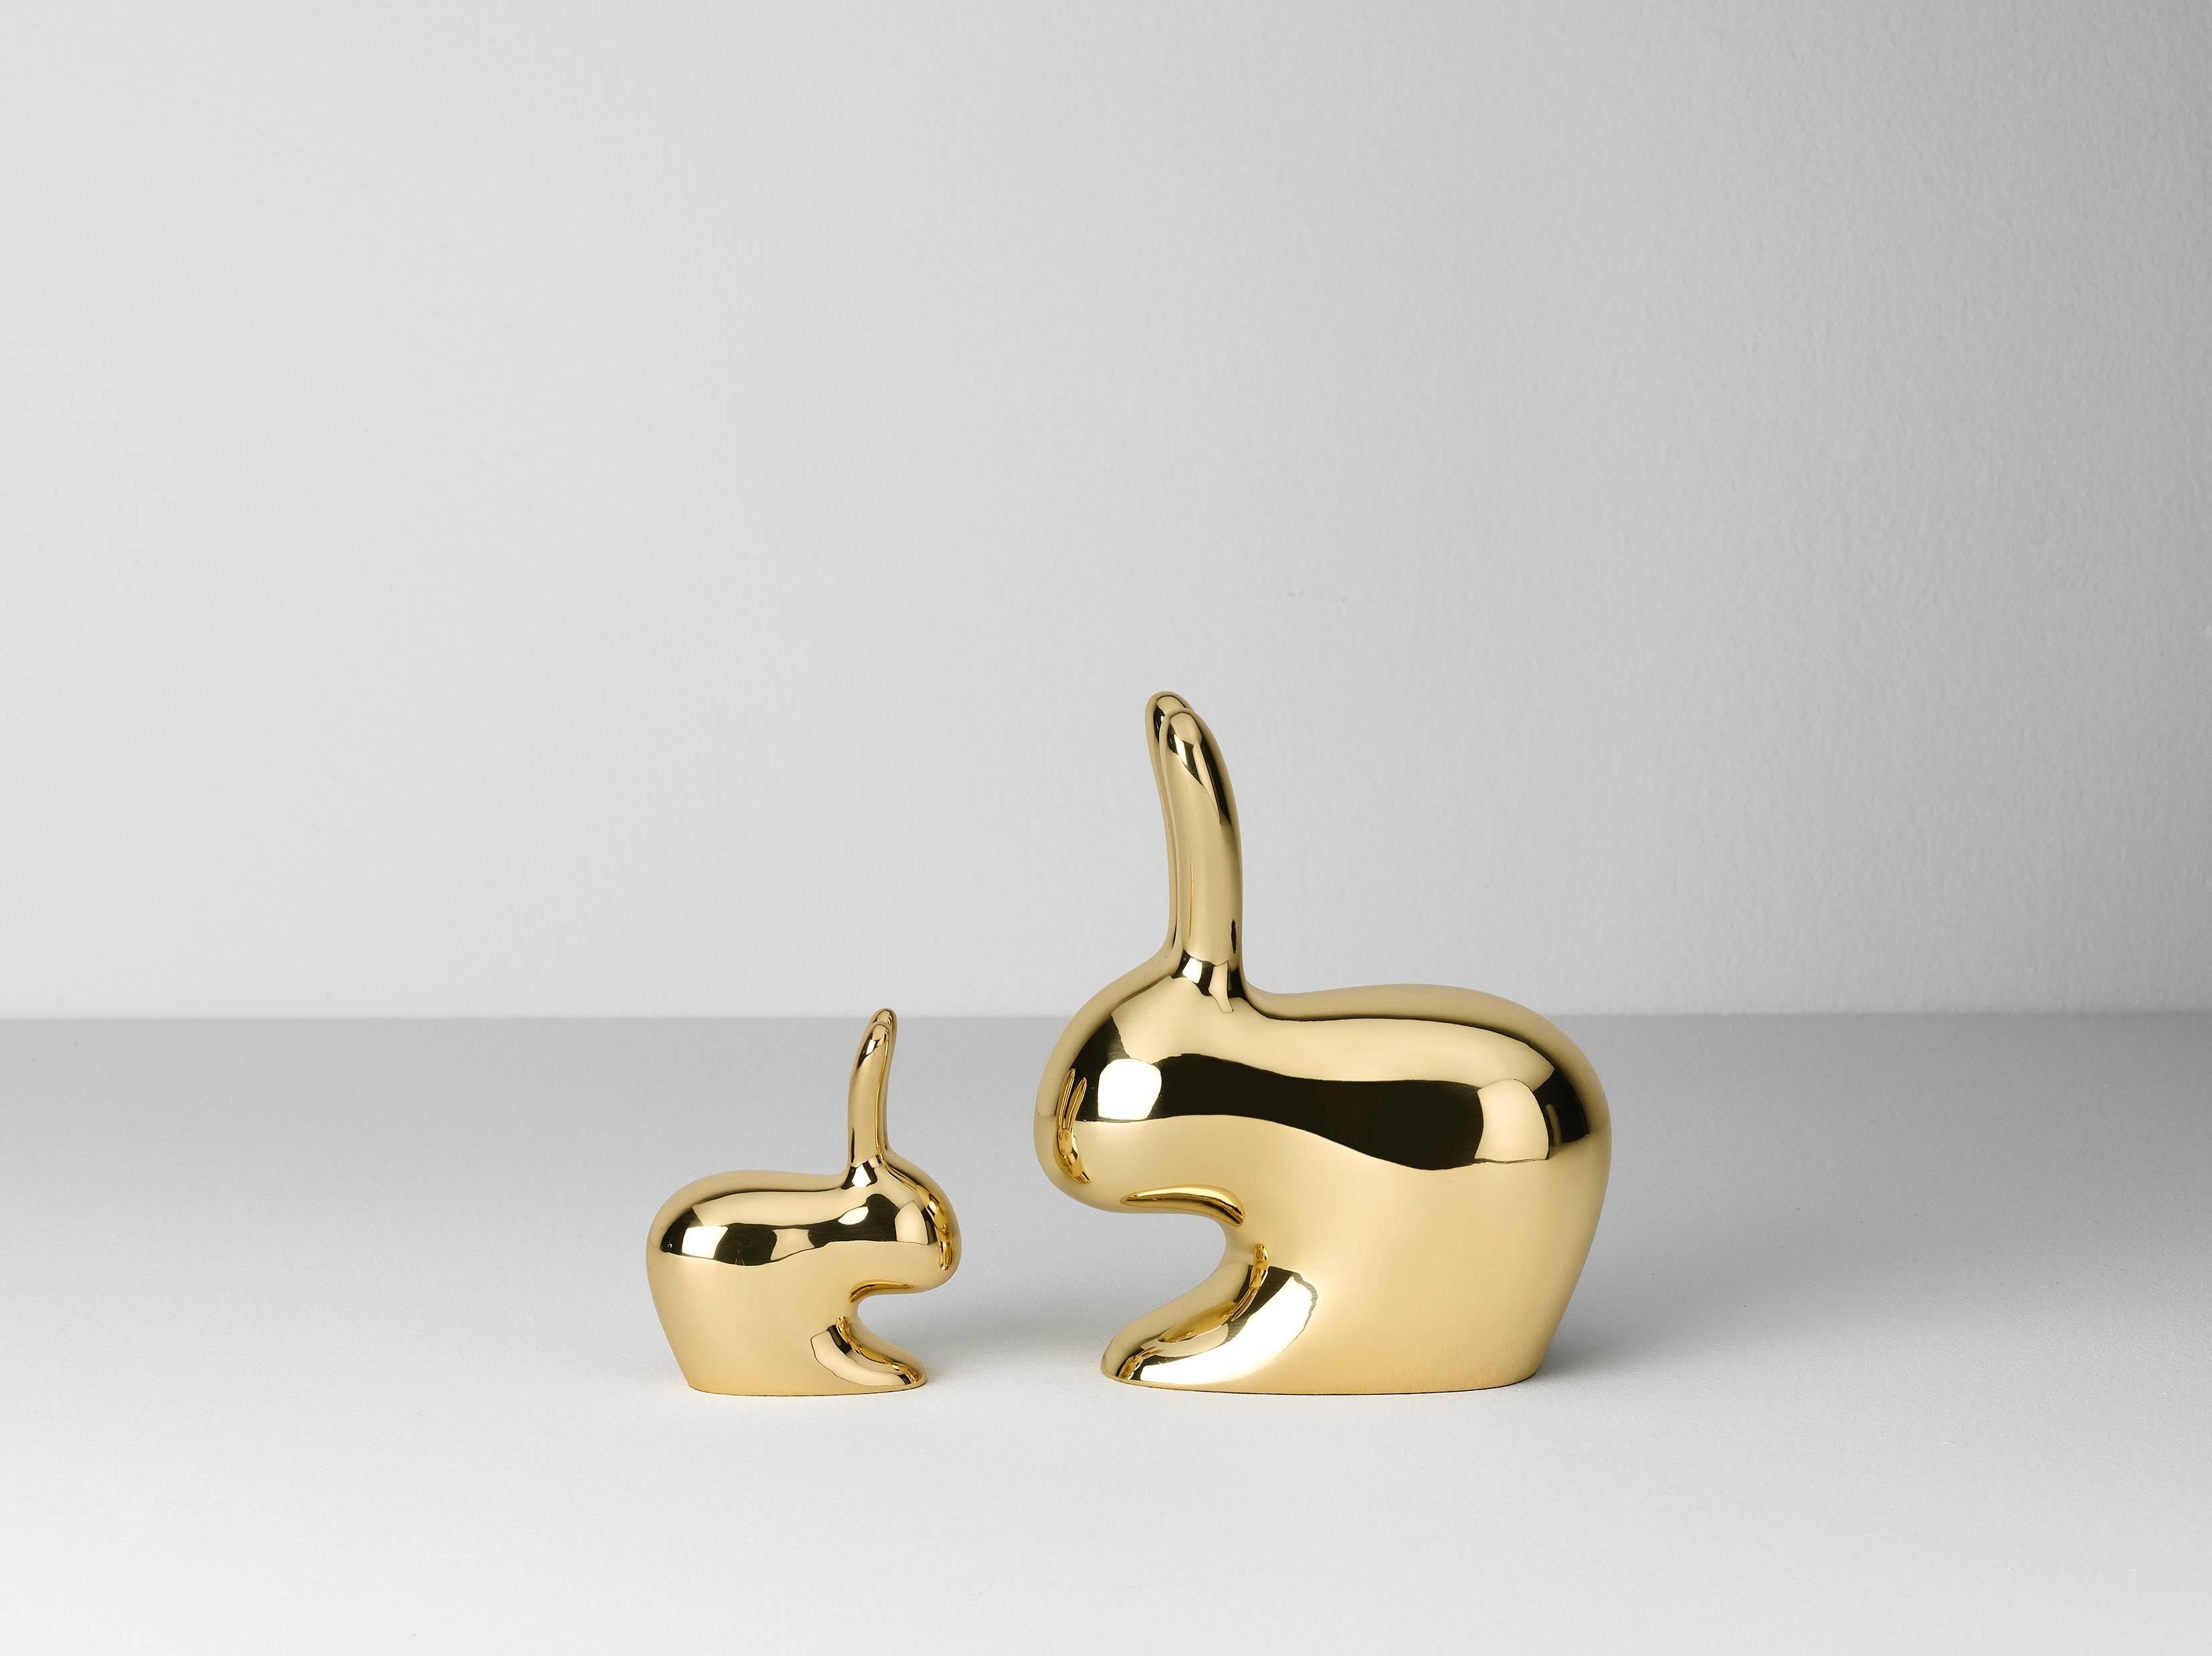 Condiment salt and pepper in casted brass designed by Stefano Giovannoni.